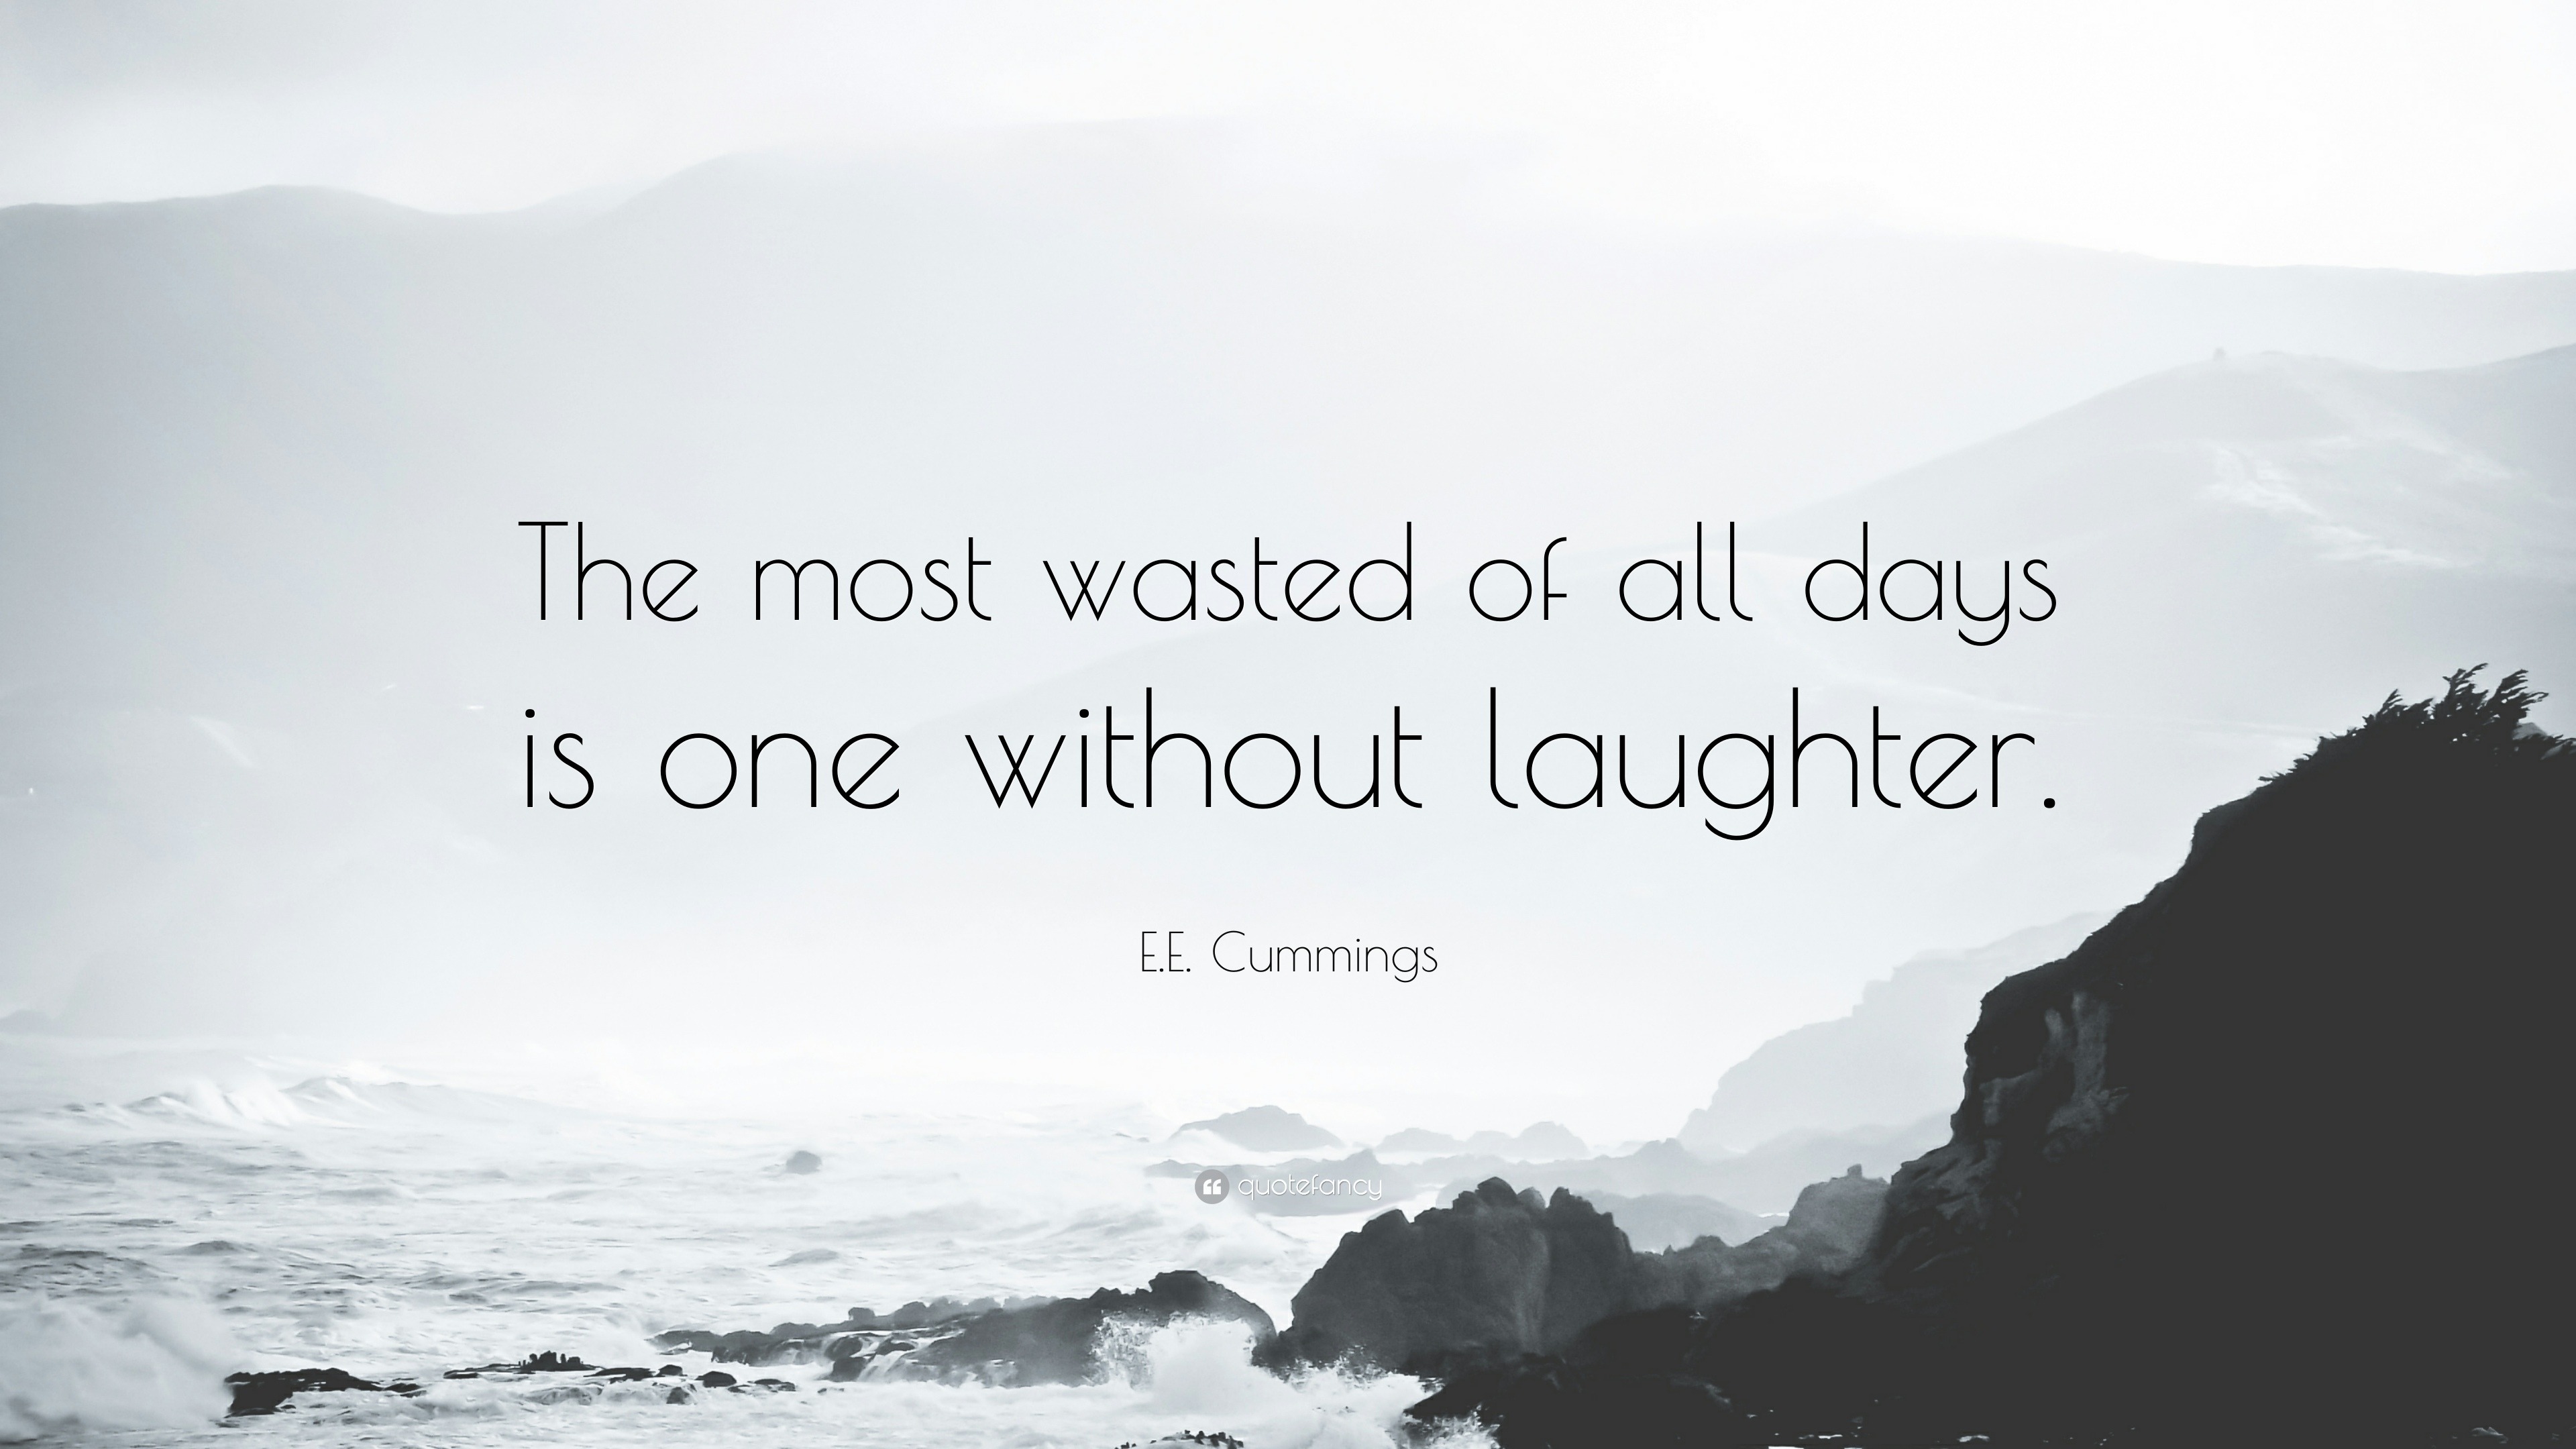 E.E. Cummings Quote: “The most wasted of all days is one without laughter.” (12 ...